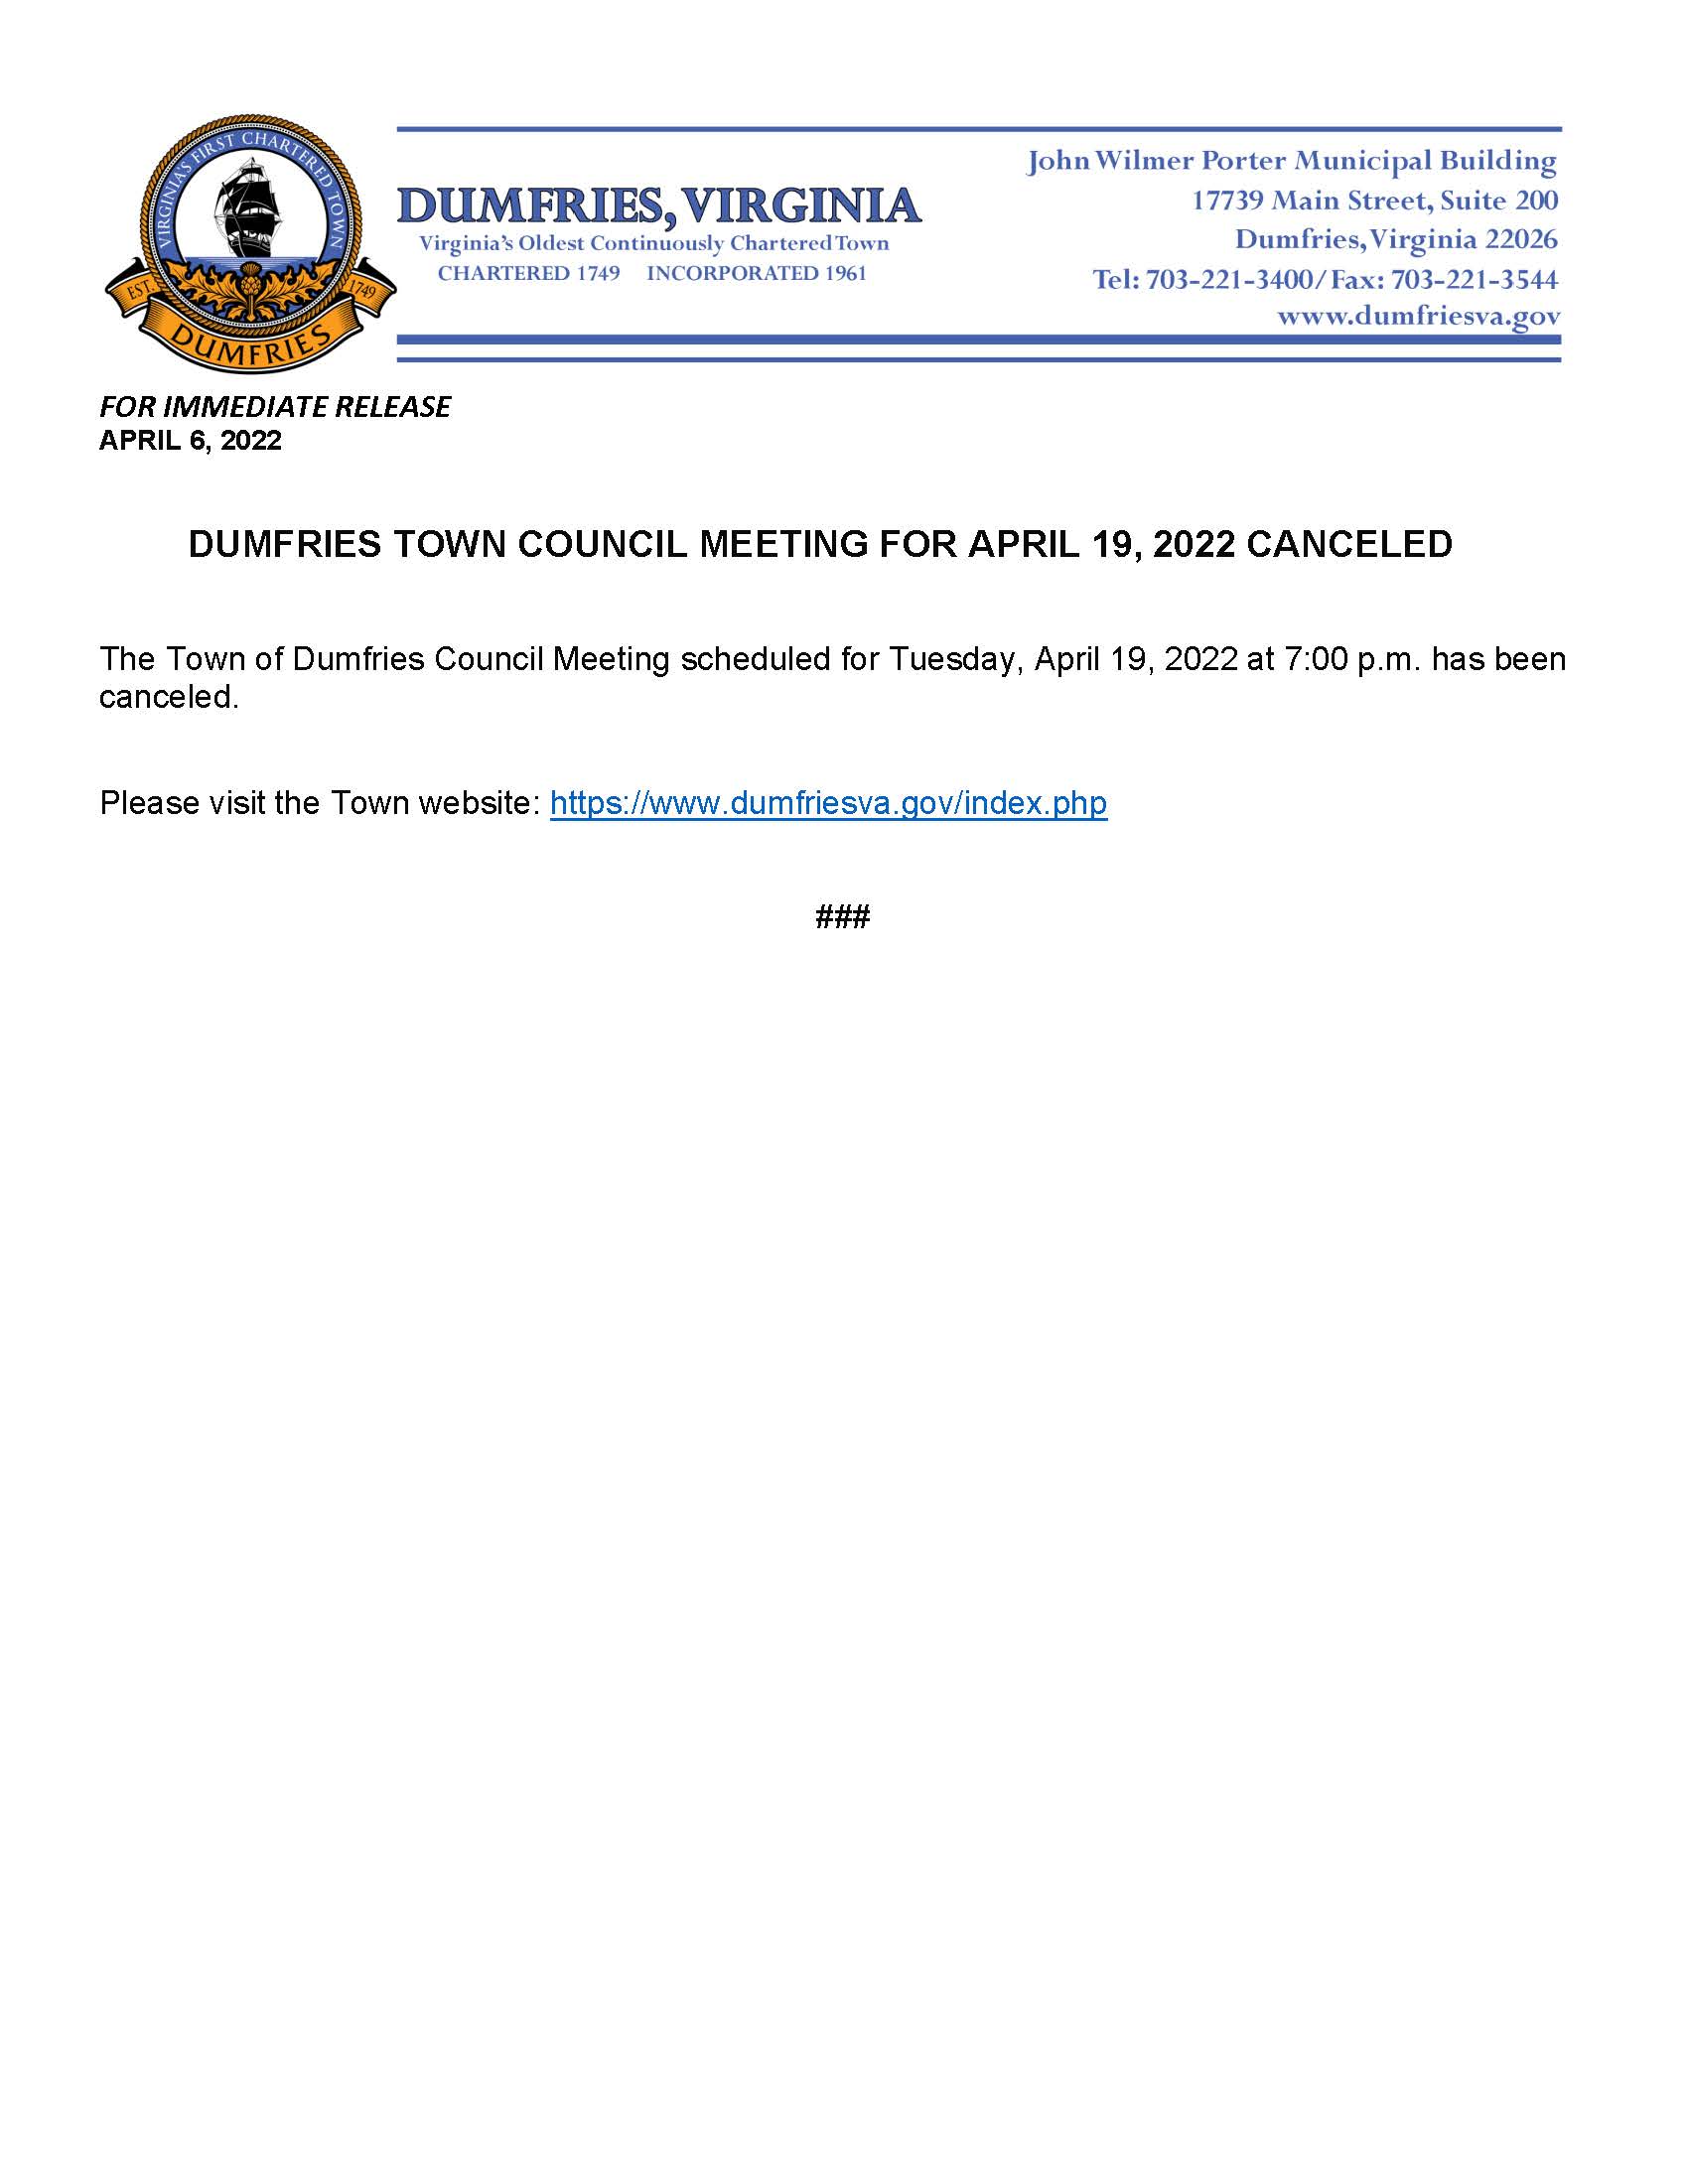 Town Council Meeting Canceled 04192022 final